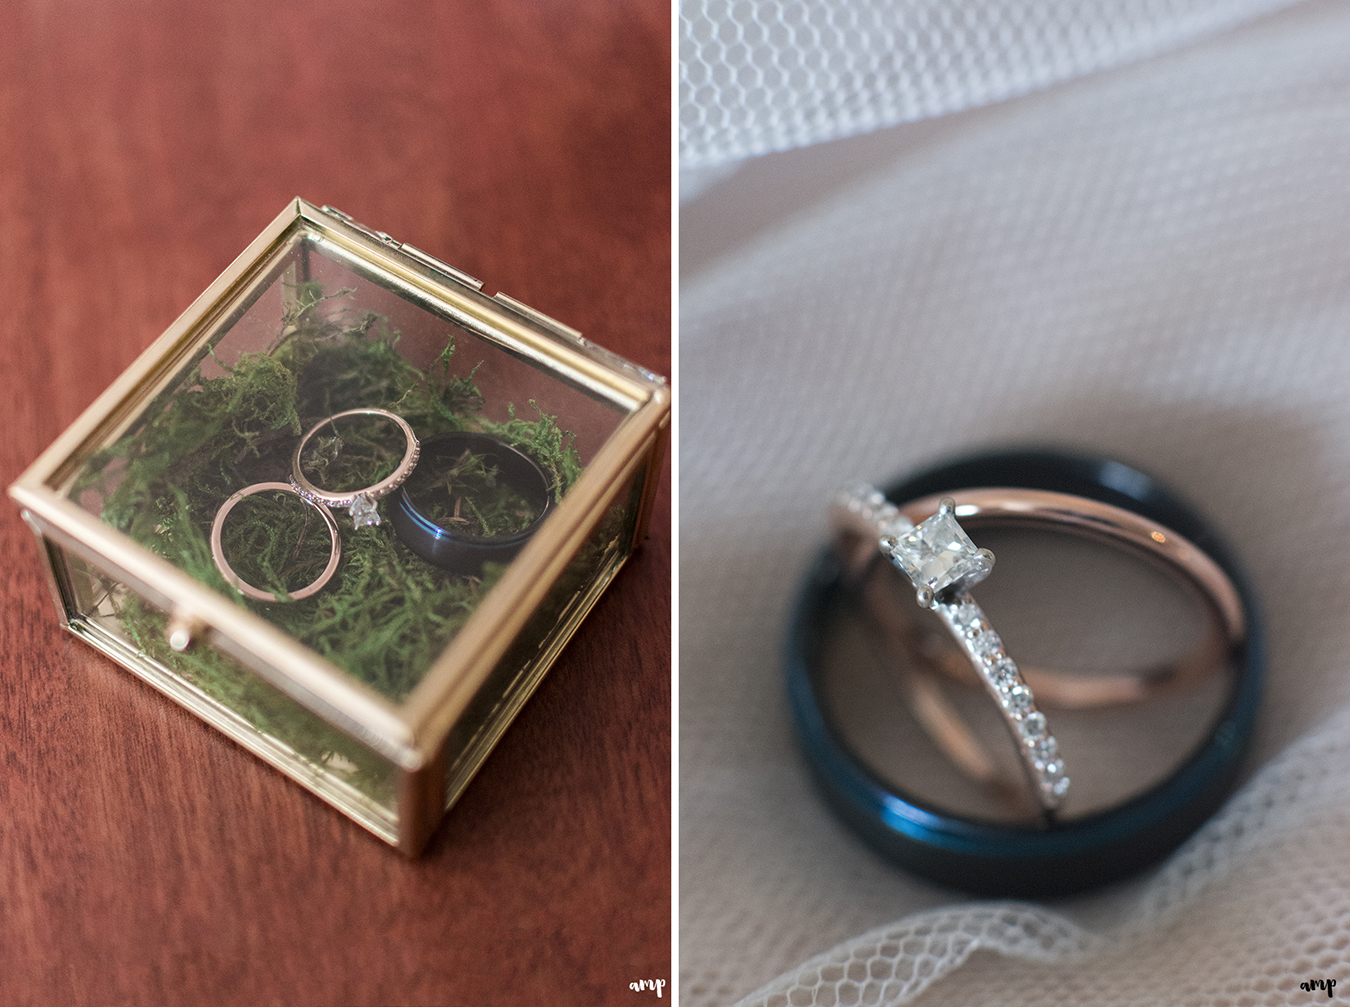 Wedding rings in antique gold and glass ring box